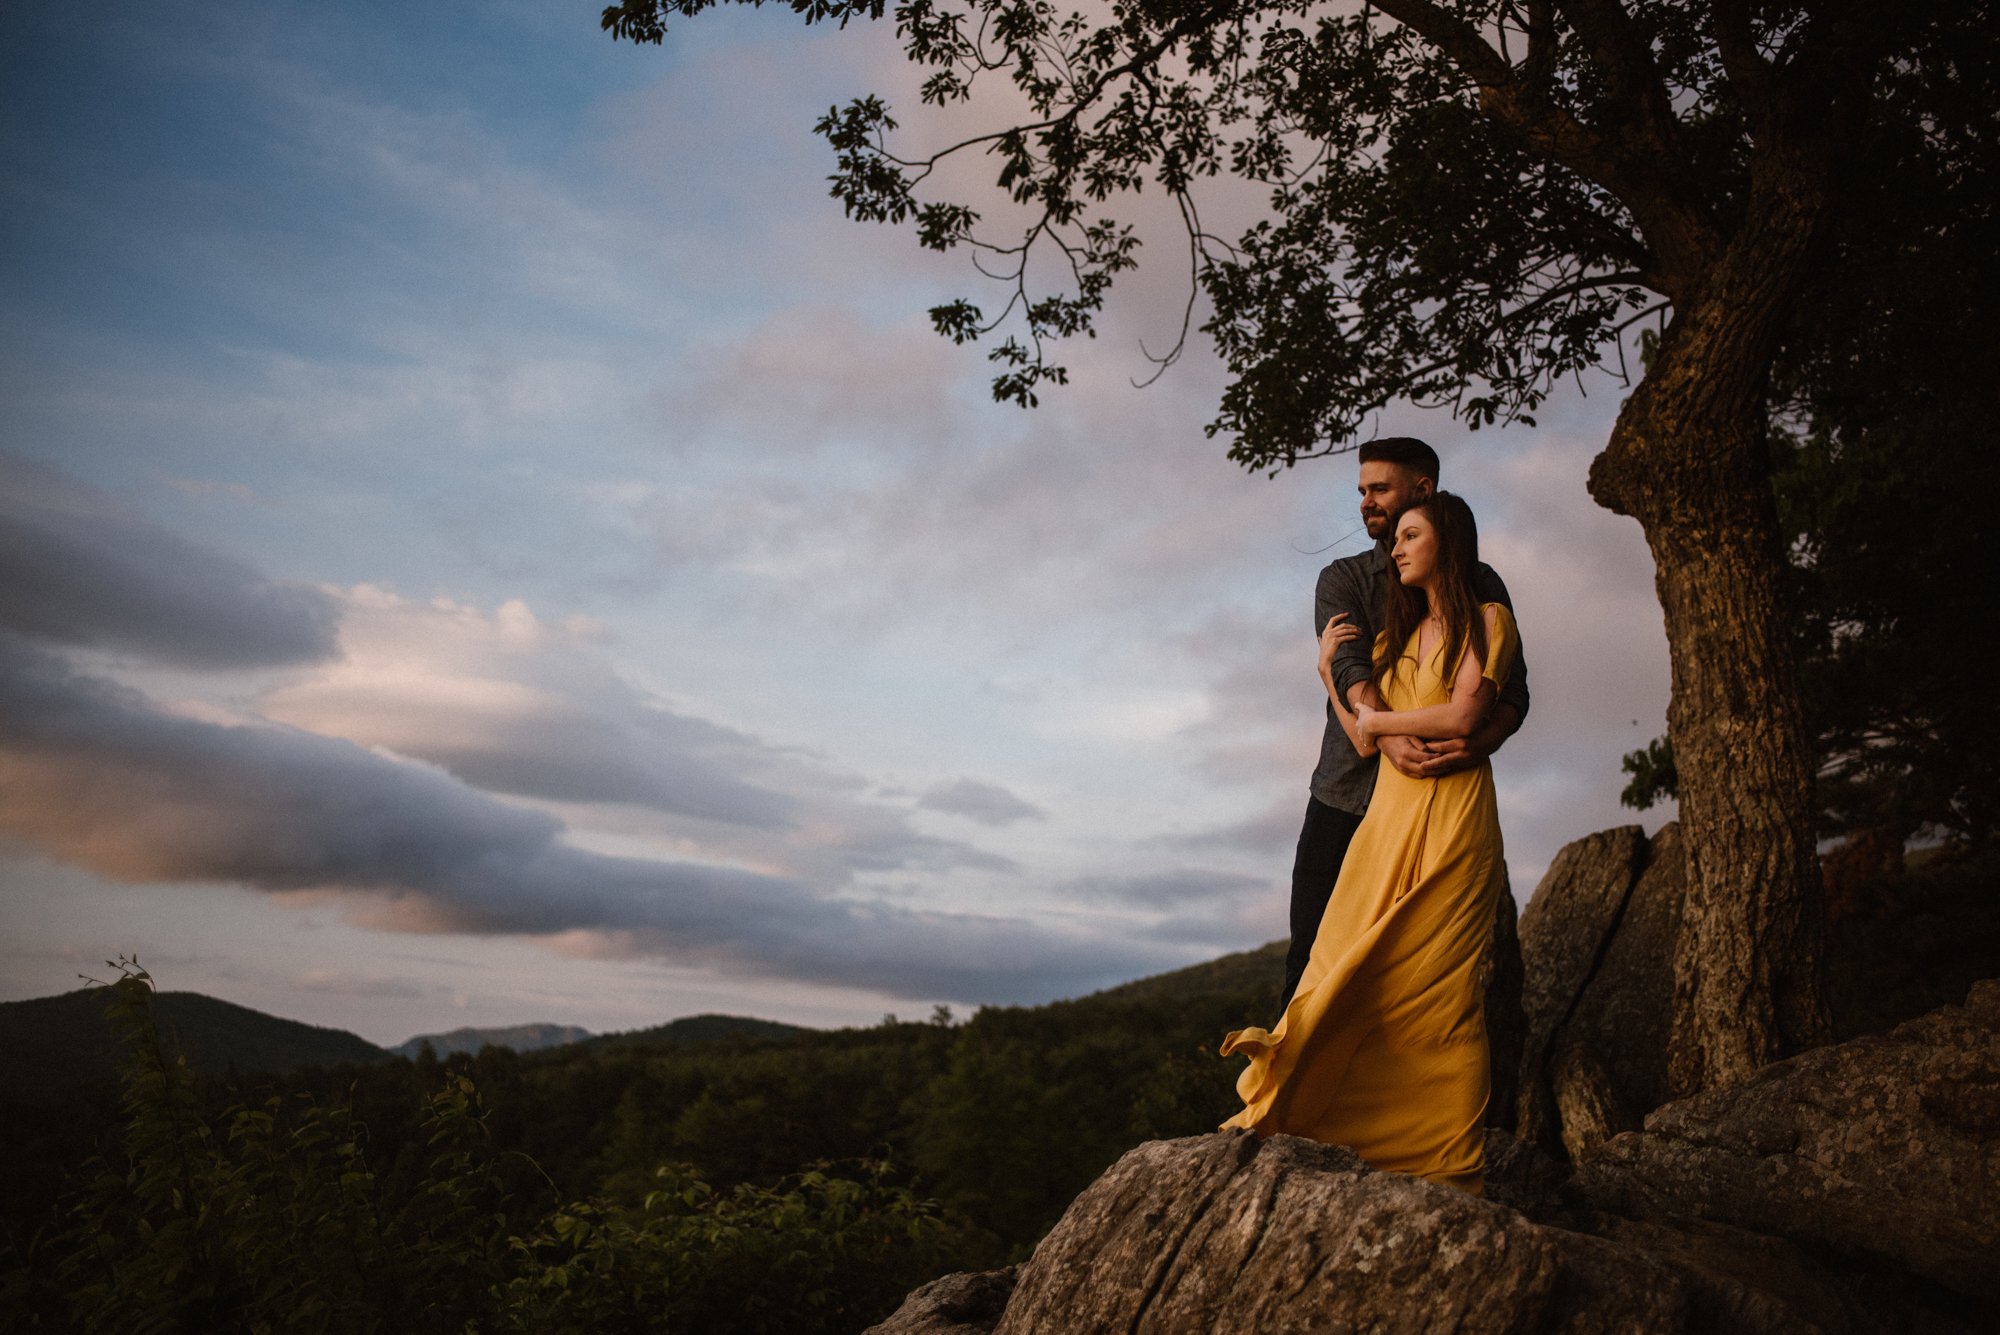 Camryn and Larry Sunrise Engagement Session in Shenandoah National Park - Things to Do in Luray Virginia - Adventurous Couple Photo Shoot White Sails Creative_11.jpg